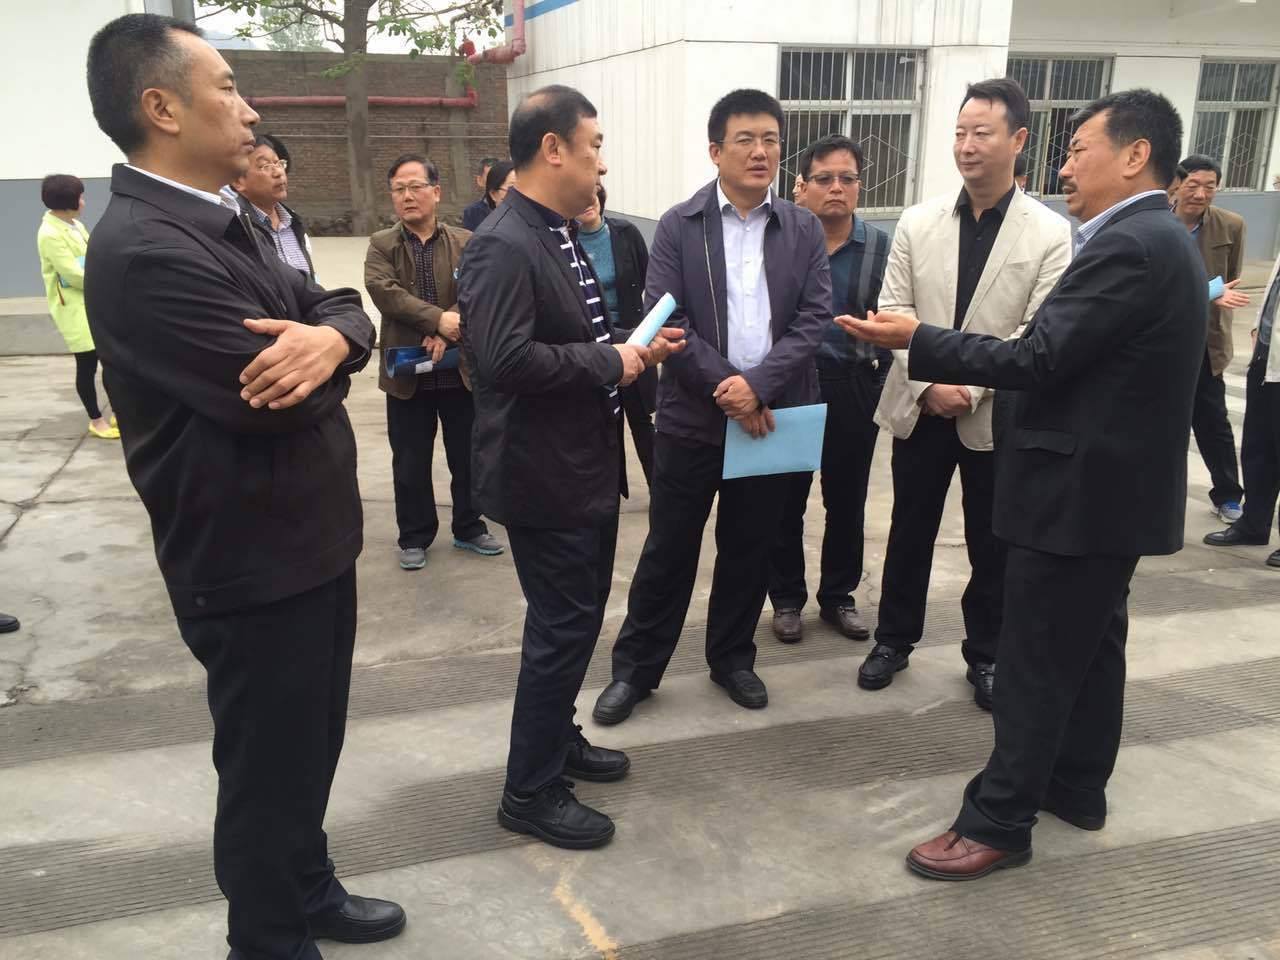 Wei Ren, Vice Chairman of the CPPCC, visited the company